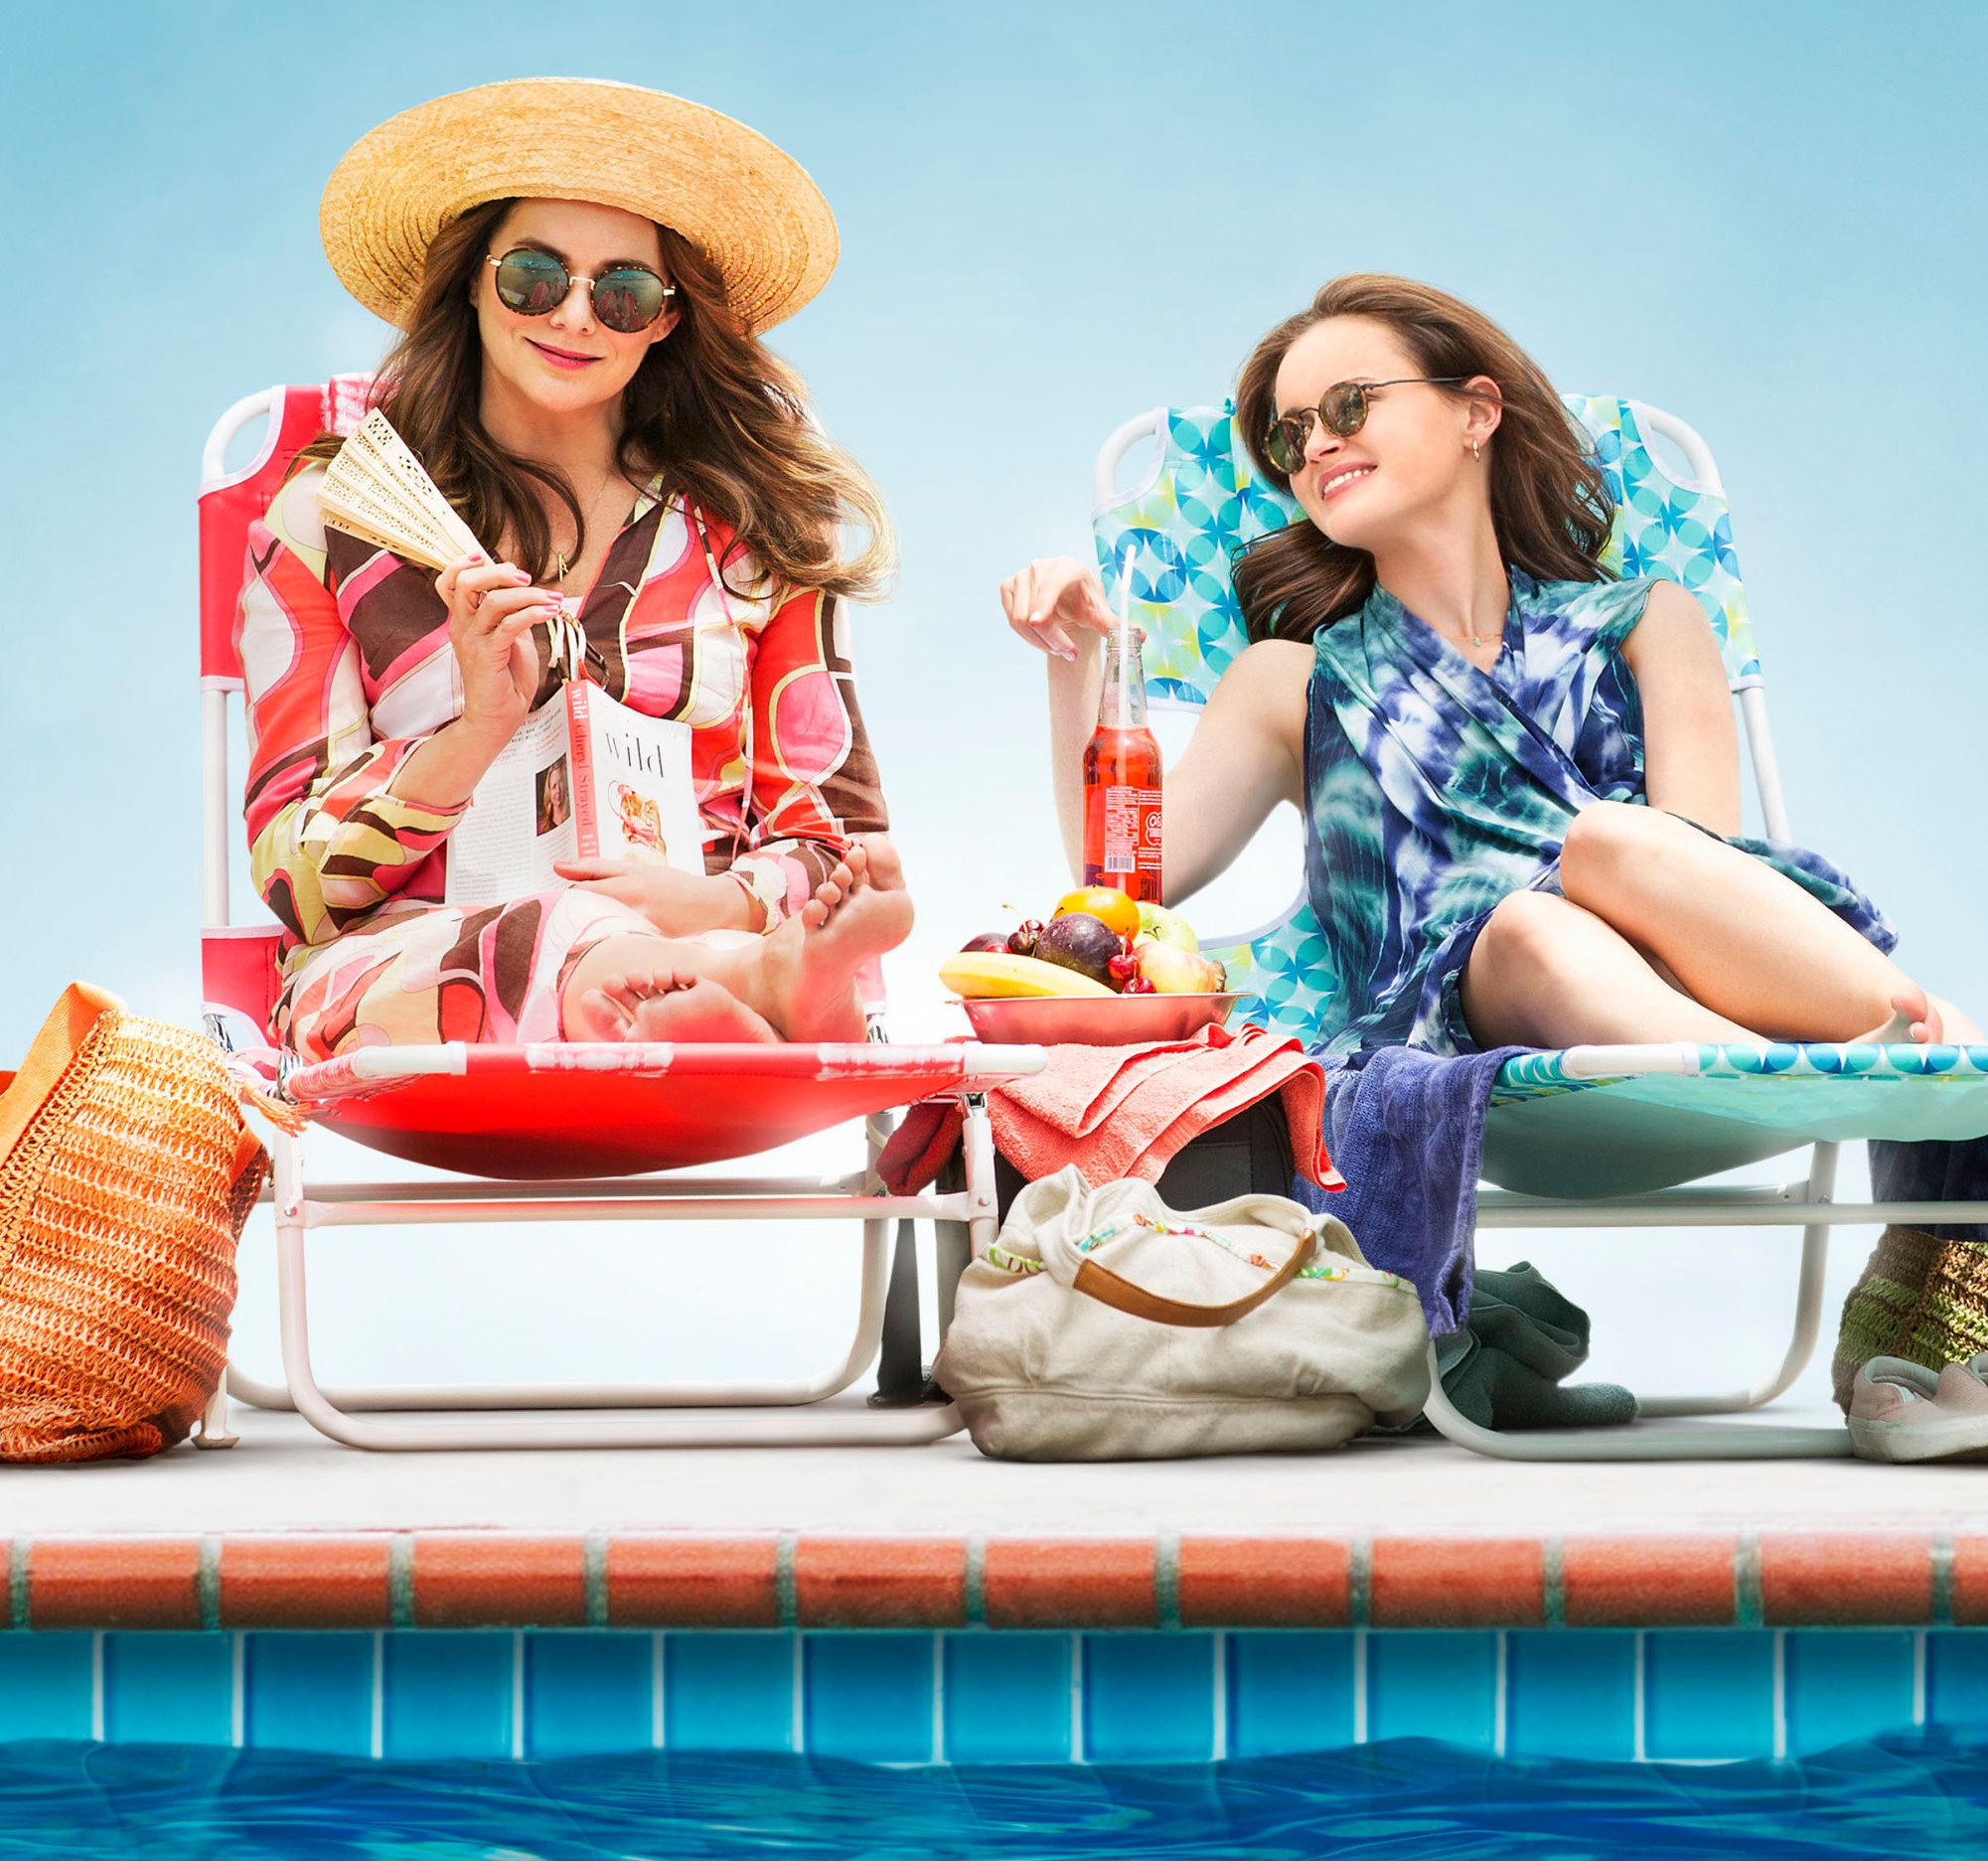 Lauren Graham as Lorelai Gilmore and Alexis Bledel as Rory Gilmore hanging out at a pool